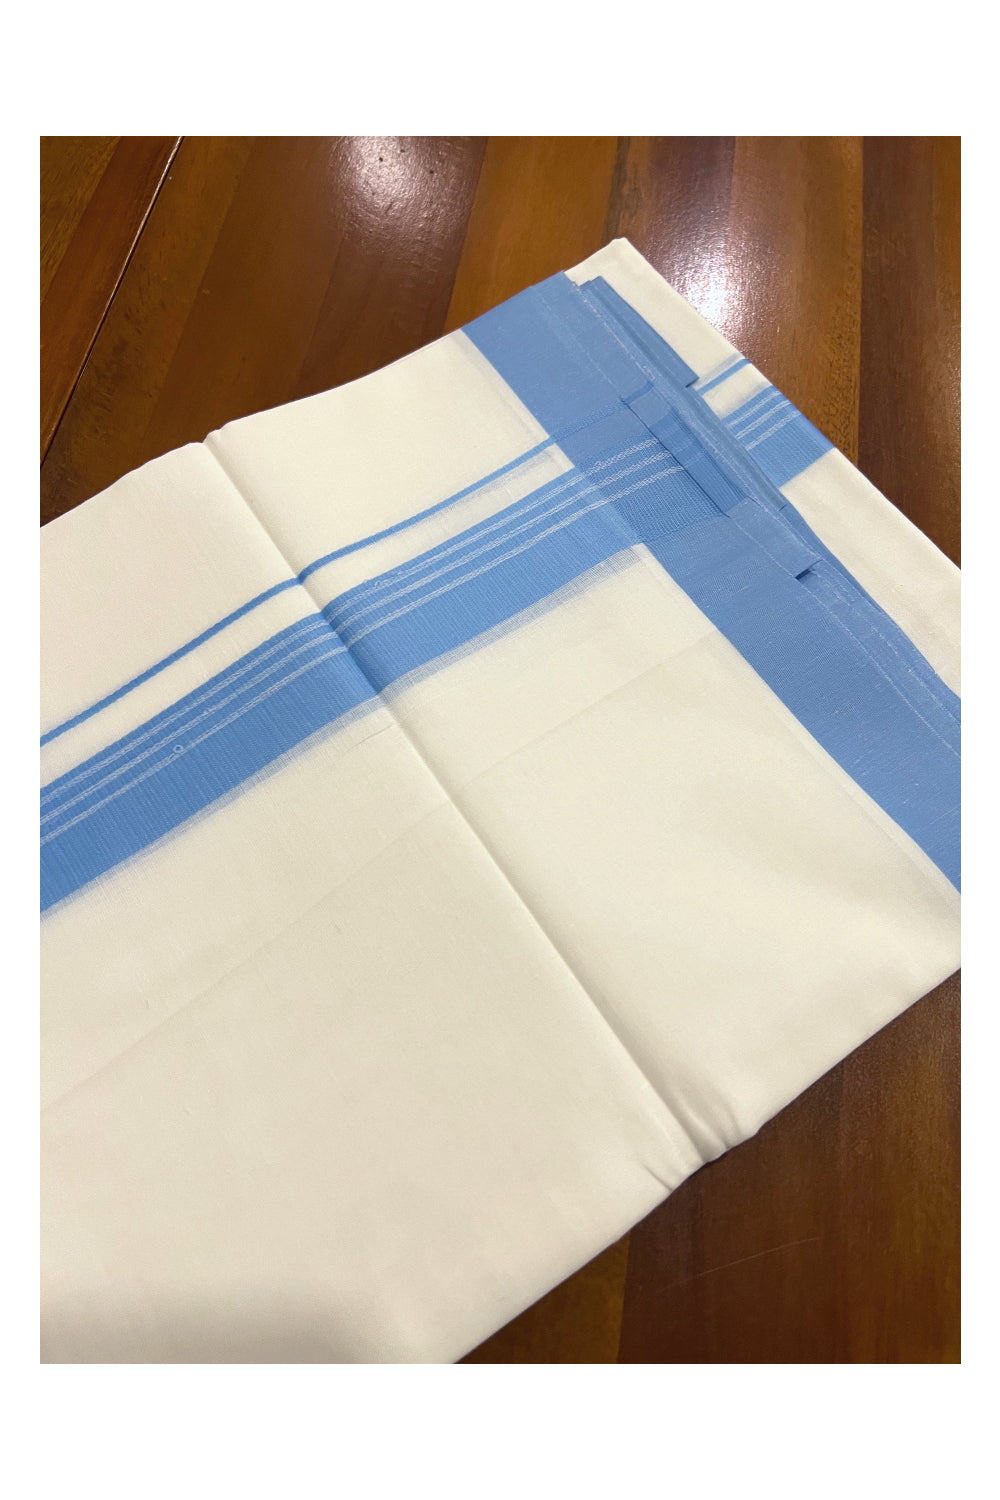 Pure White Cotton Double Mundu with Light Blue Border (South Indian Dhoti)